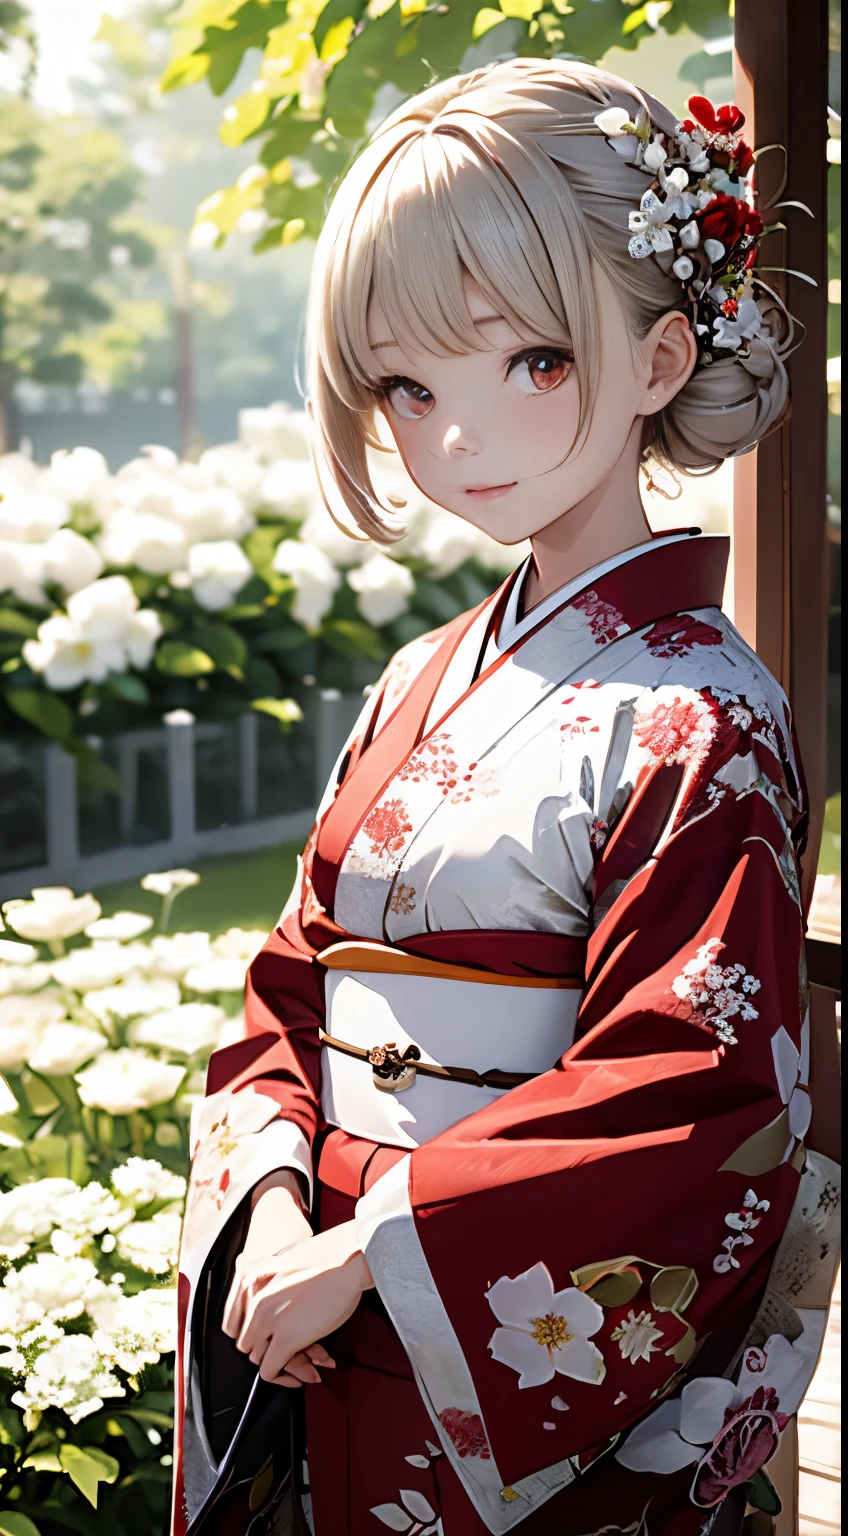 The background is a world of white flowers、Best Quality, masutepiece, High resolution, (((1girl in))), sixteen years old,Red Eyes、Dark red kimono、((Dark red floral kimono)), Tindall Effect, Realistic, Shadow Studio, Red lighting, dual-tone lighting, (High Detail Skins: 1.2) Digital SLR, Photo, High resolution, 4K, 8K, Background blur,Fade out beautifully、The background is a world of white flowers